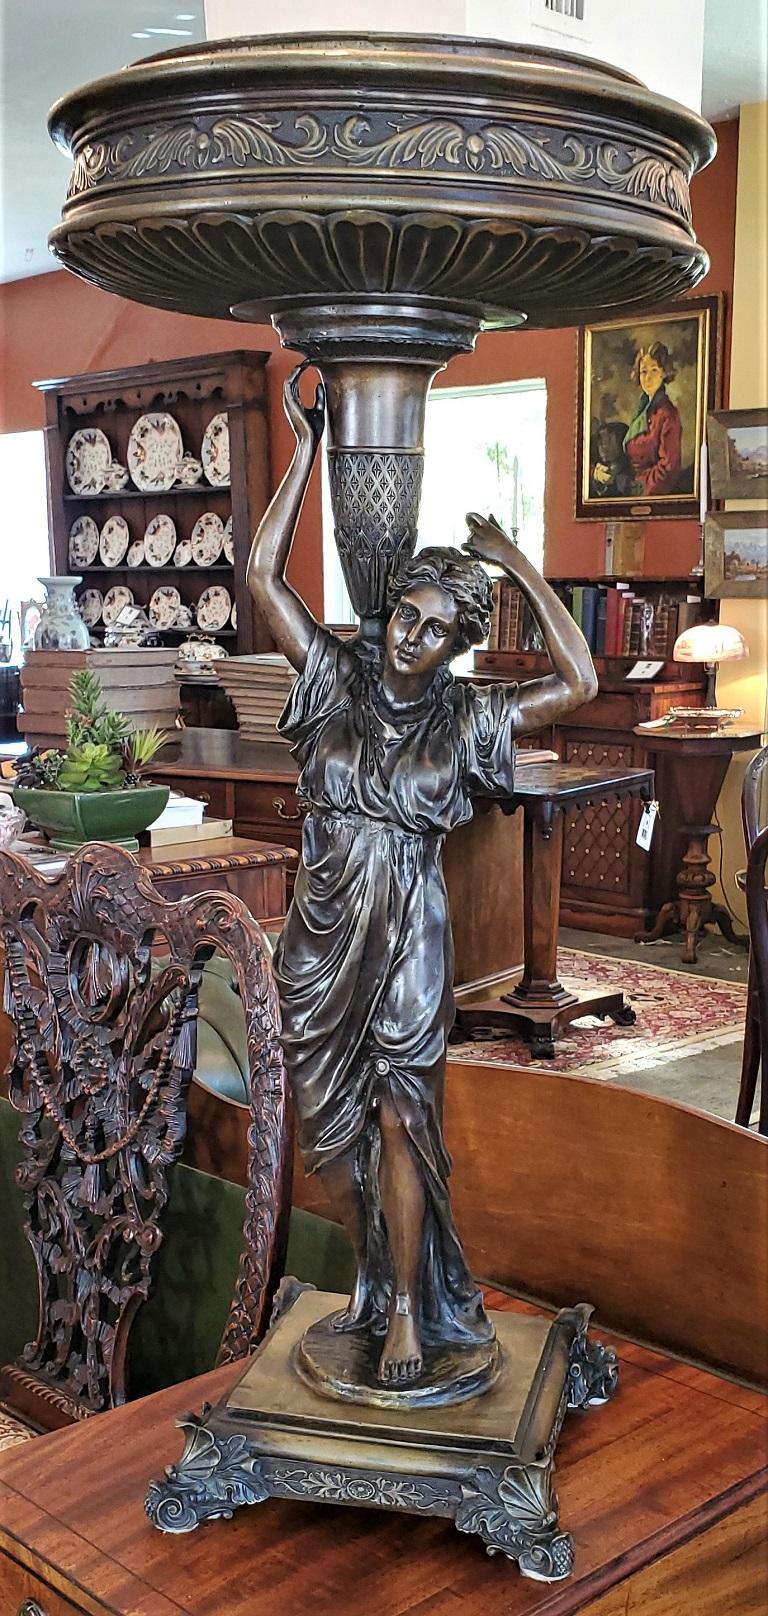 PRESENTING a STUNNING 19C French Bronze Centerpiece by A Carrier.

Made in France circa 1860, this is an ORIGINAL bronze by Albert-Ernest Carrier-Balleuse.

Properly signed on the base.

This bronze is a Centerpiece consisting of a